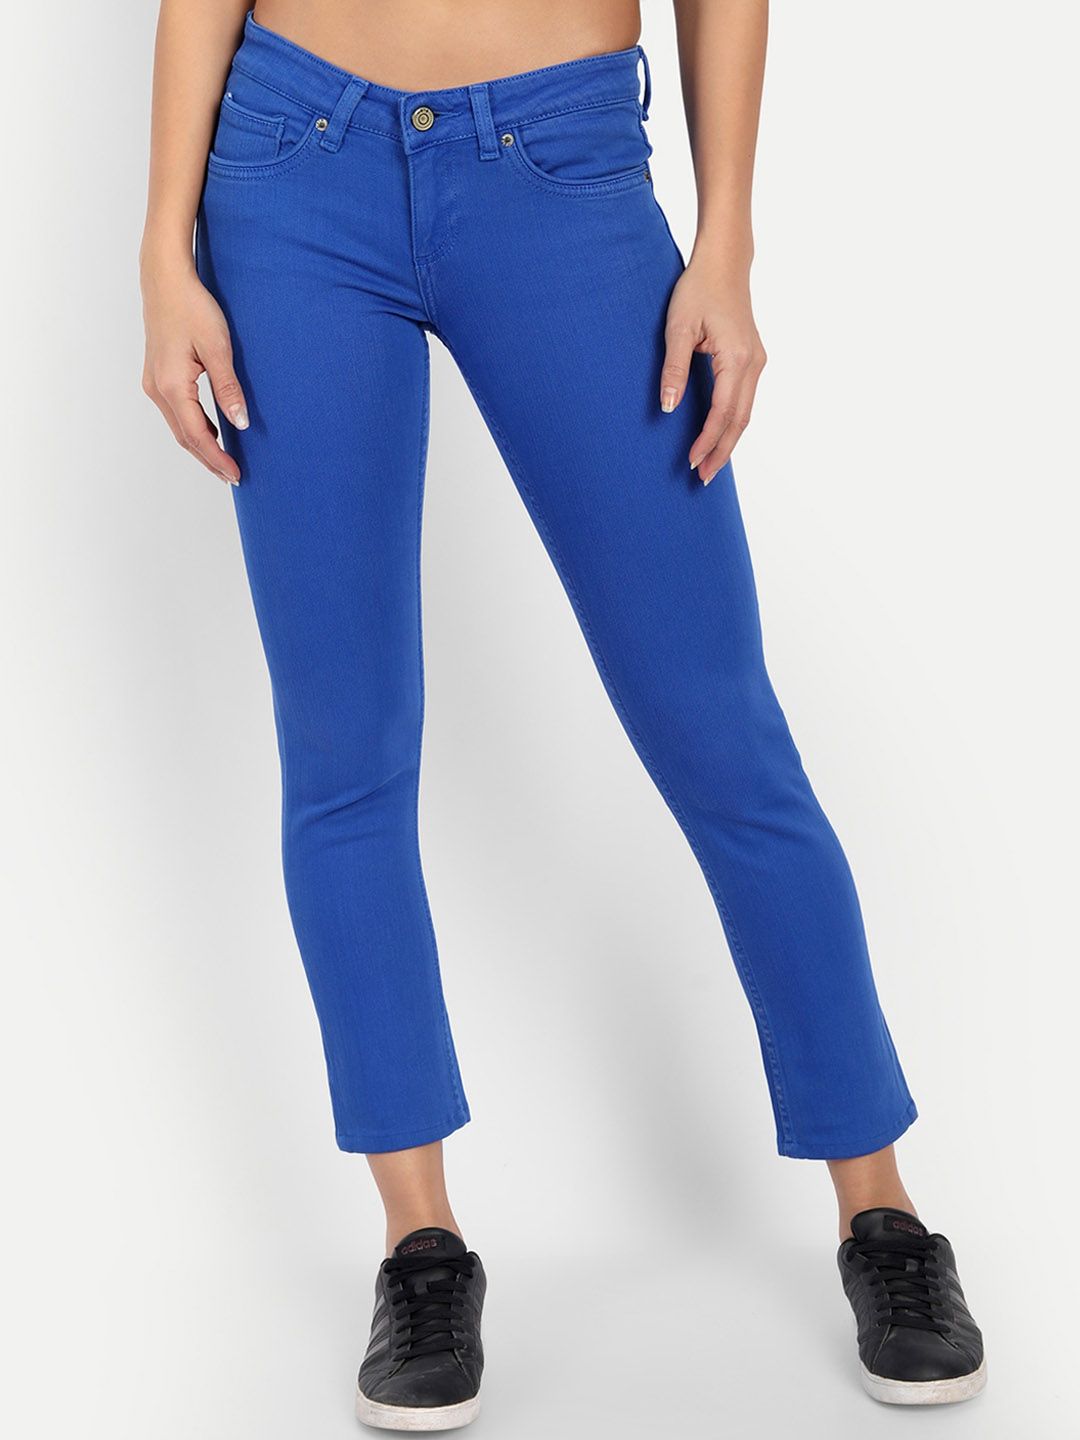 BROADSTAR Women Blue Skinny Fit Stretchable Jeans Price in India